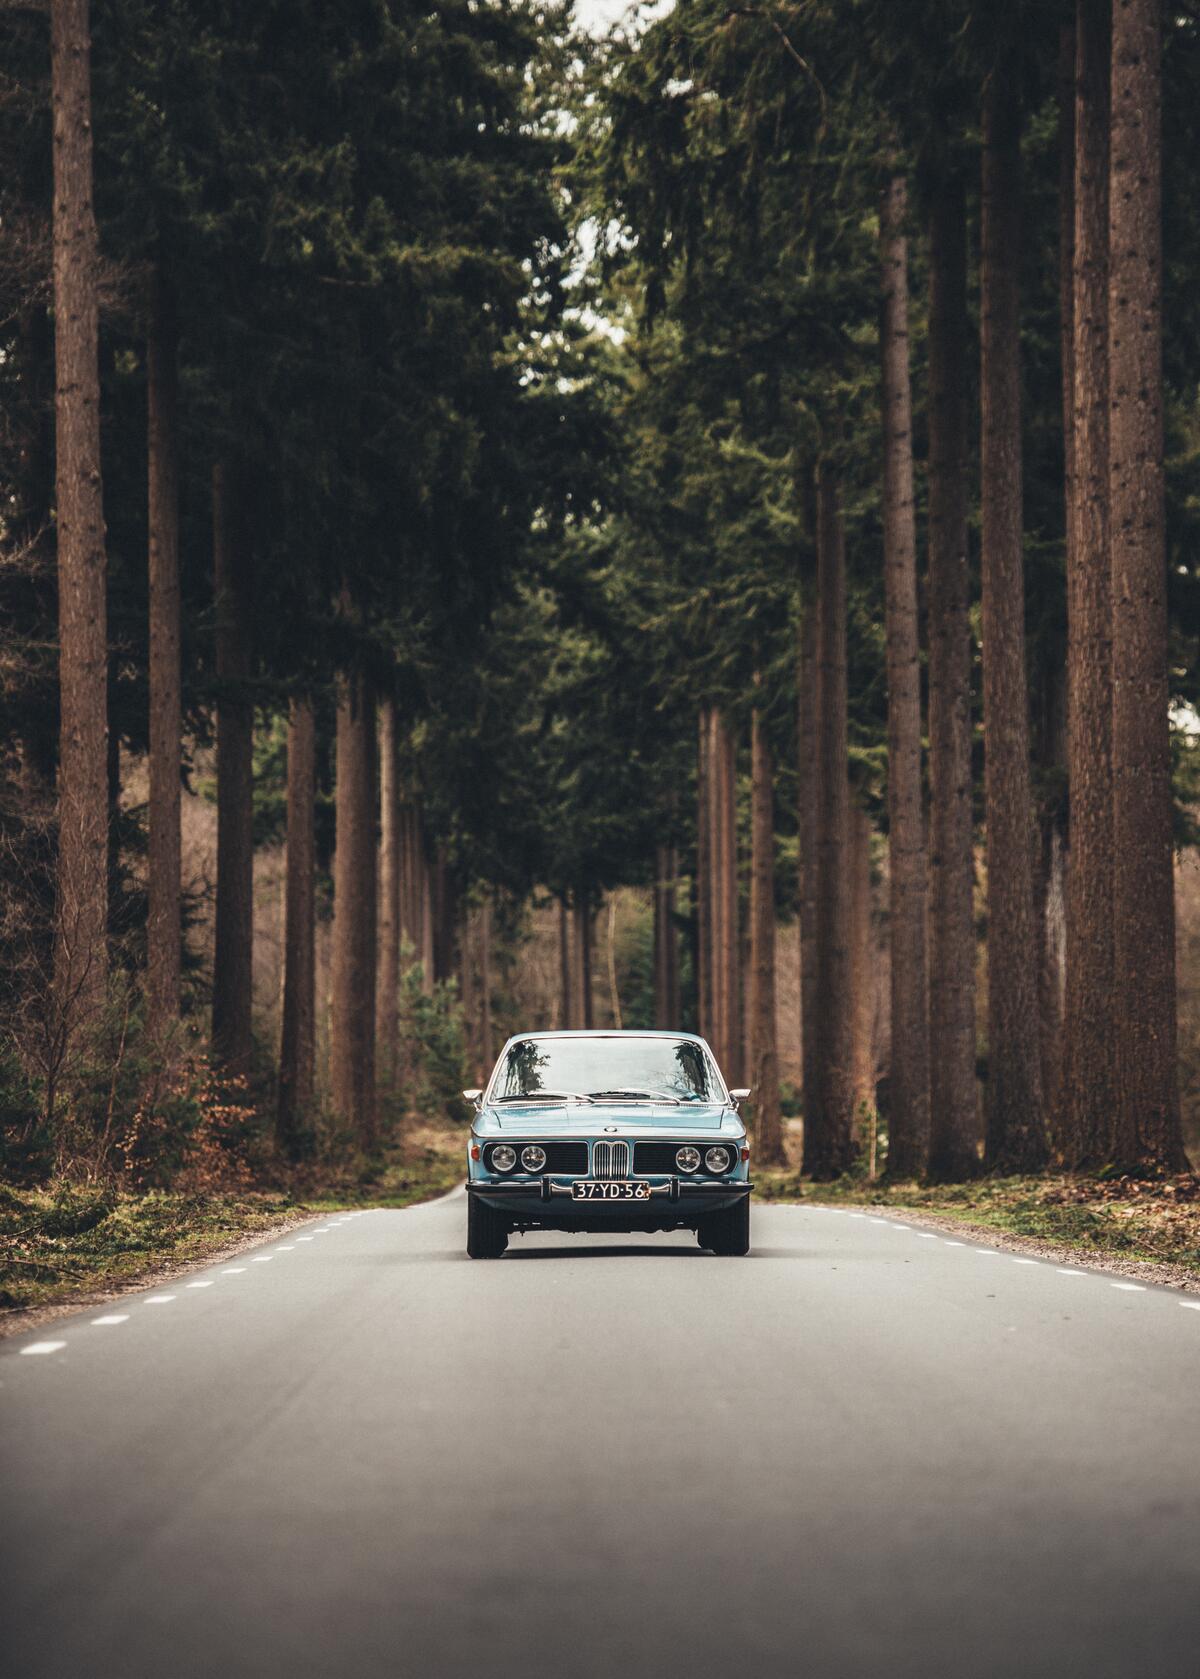 An old bmw driving in the woods.